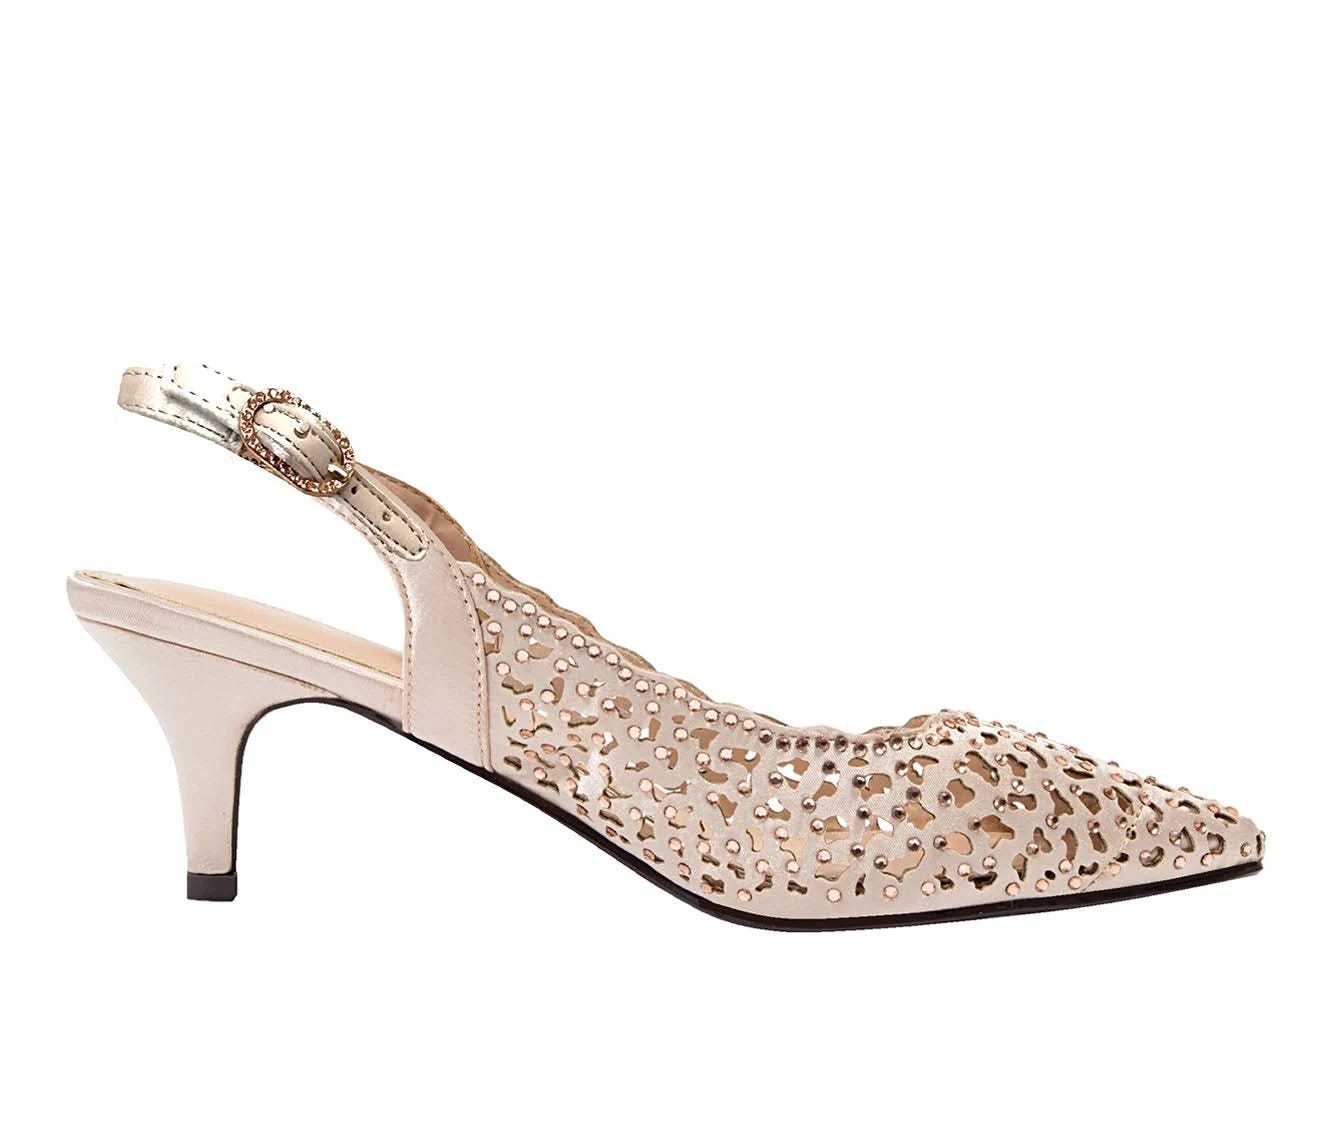 Shine With These Ladies' Slingback Pumps in Champagne | Image